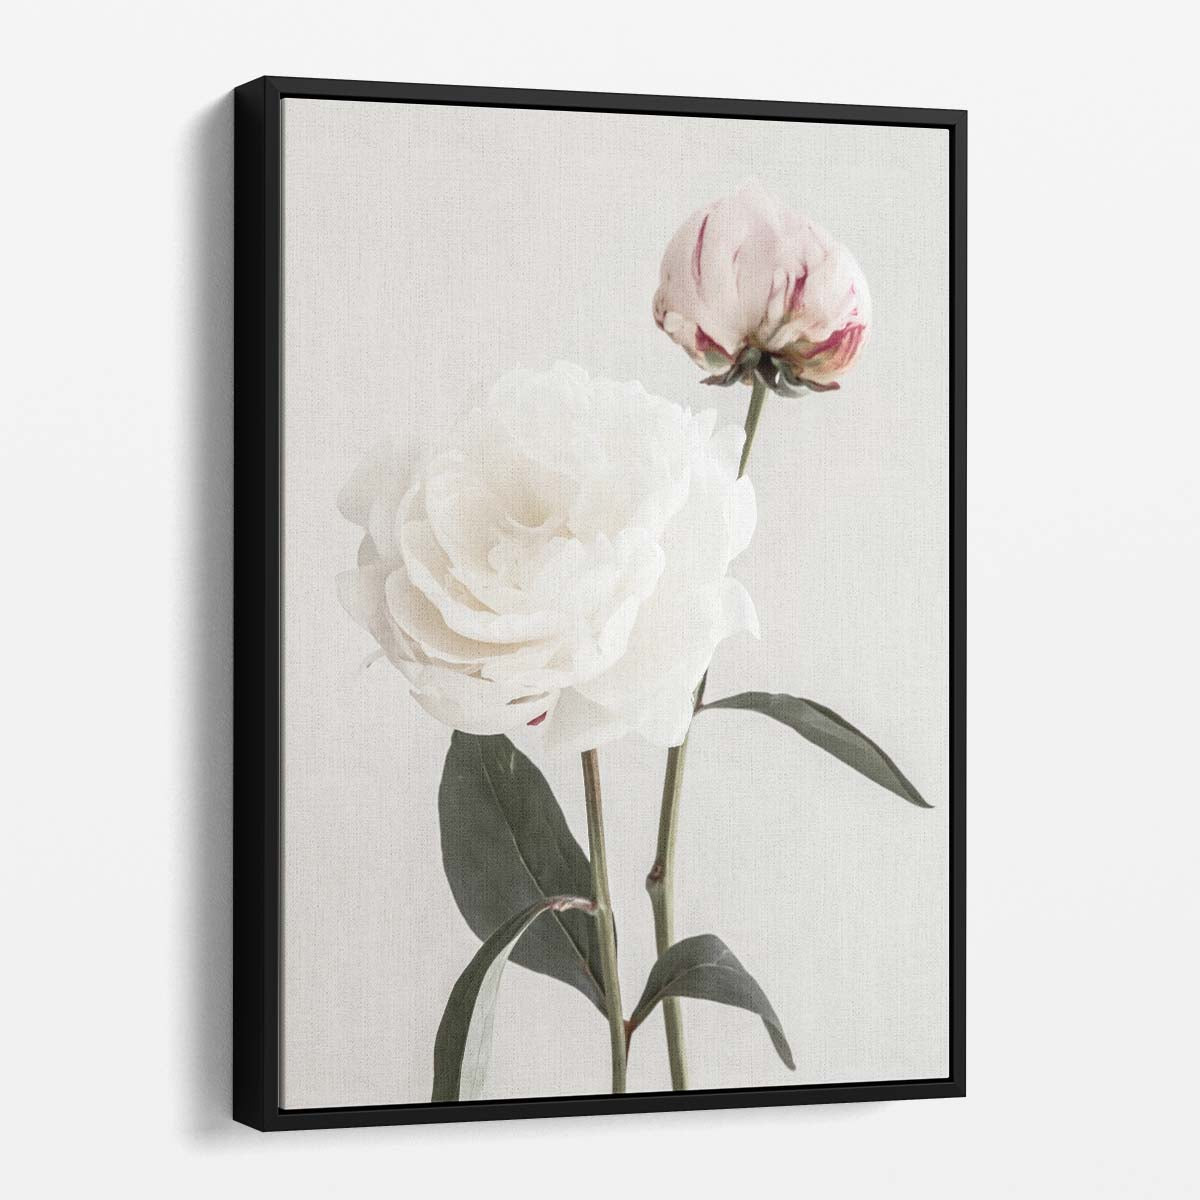 Botanical Pink Peony Blossom Photography - Still Life Floral Art by Luxuriance Designs, made in USA